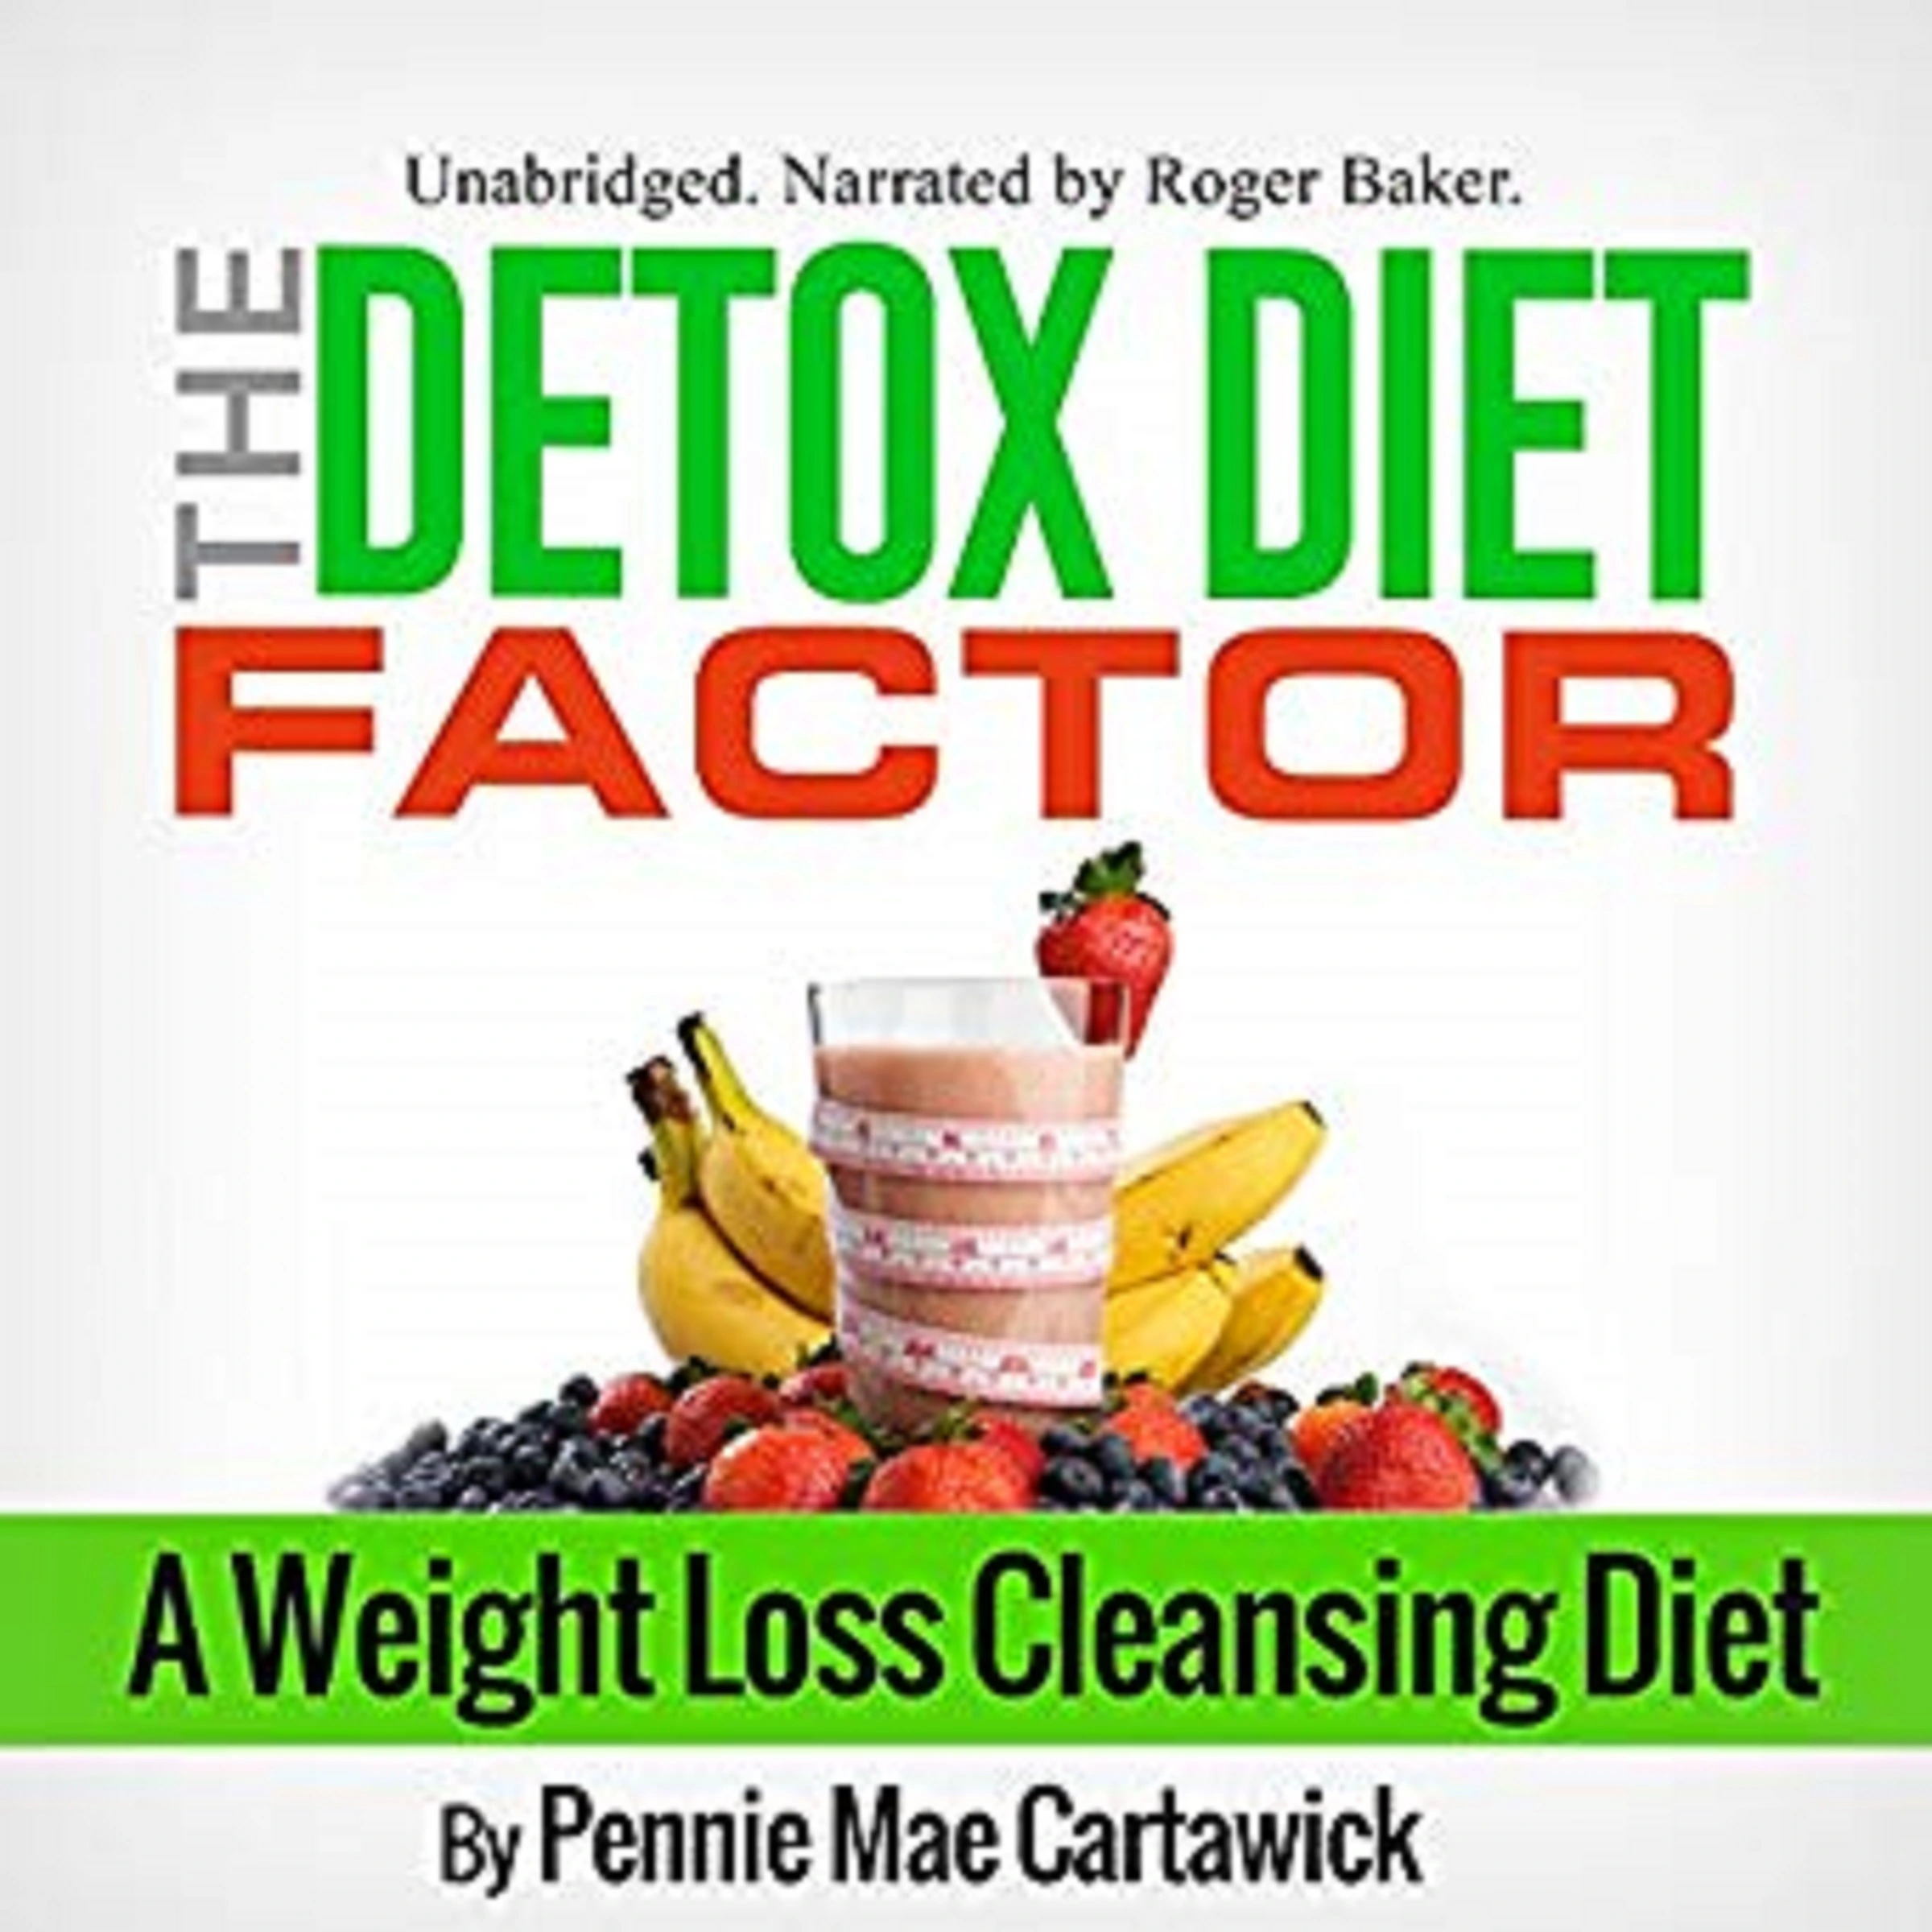 The Detox Diet Factor: A Weight Loss Cleansing Diet Audiobook by Pennie Mae Cartawick